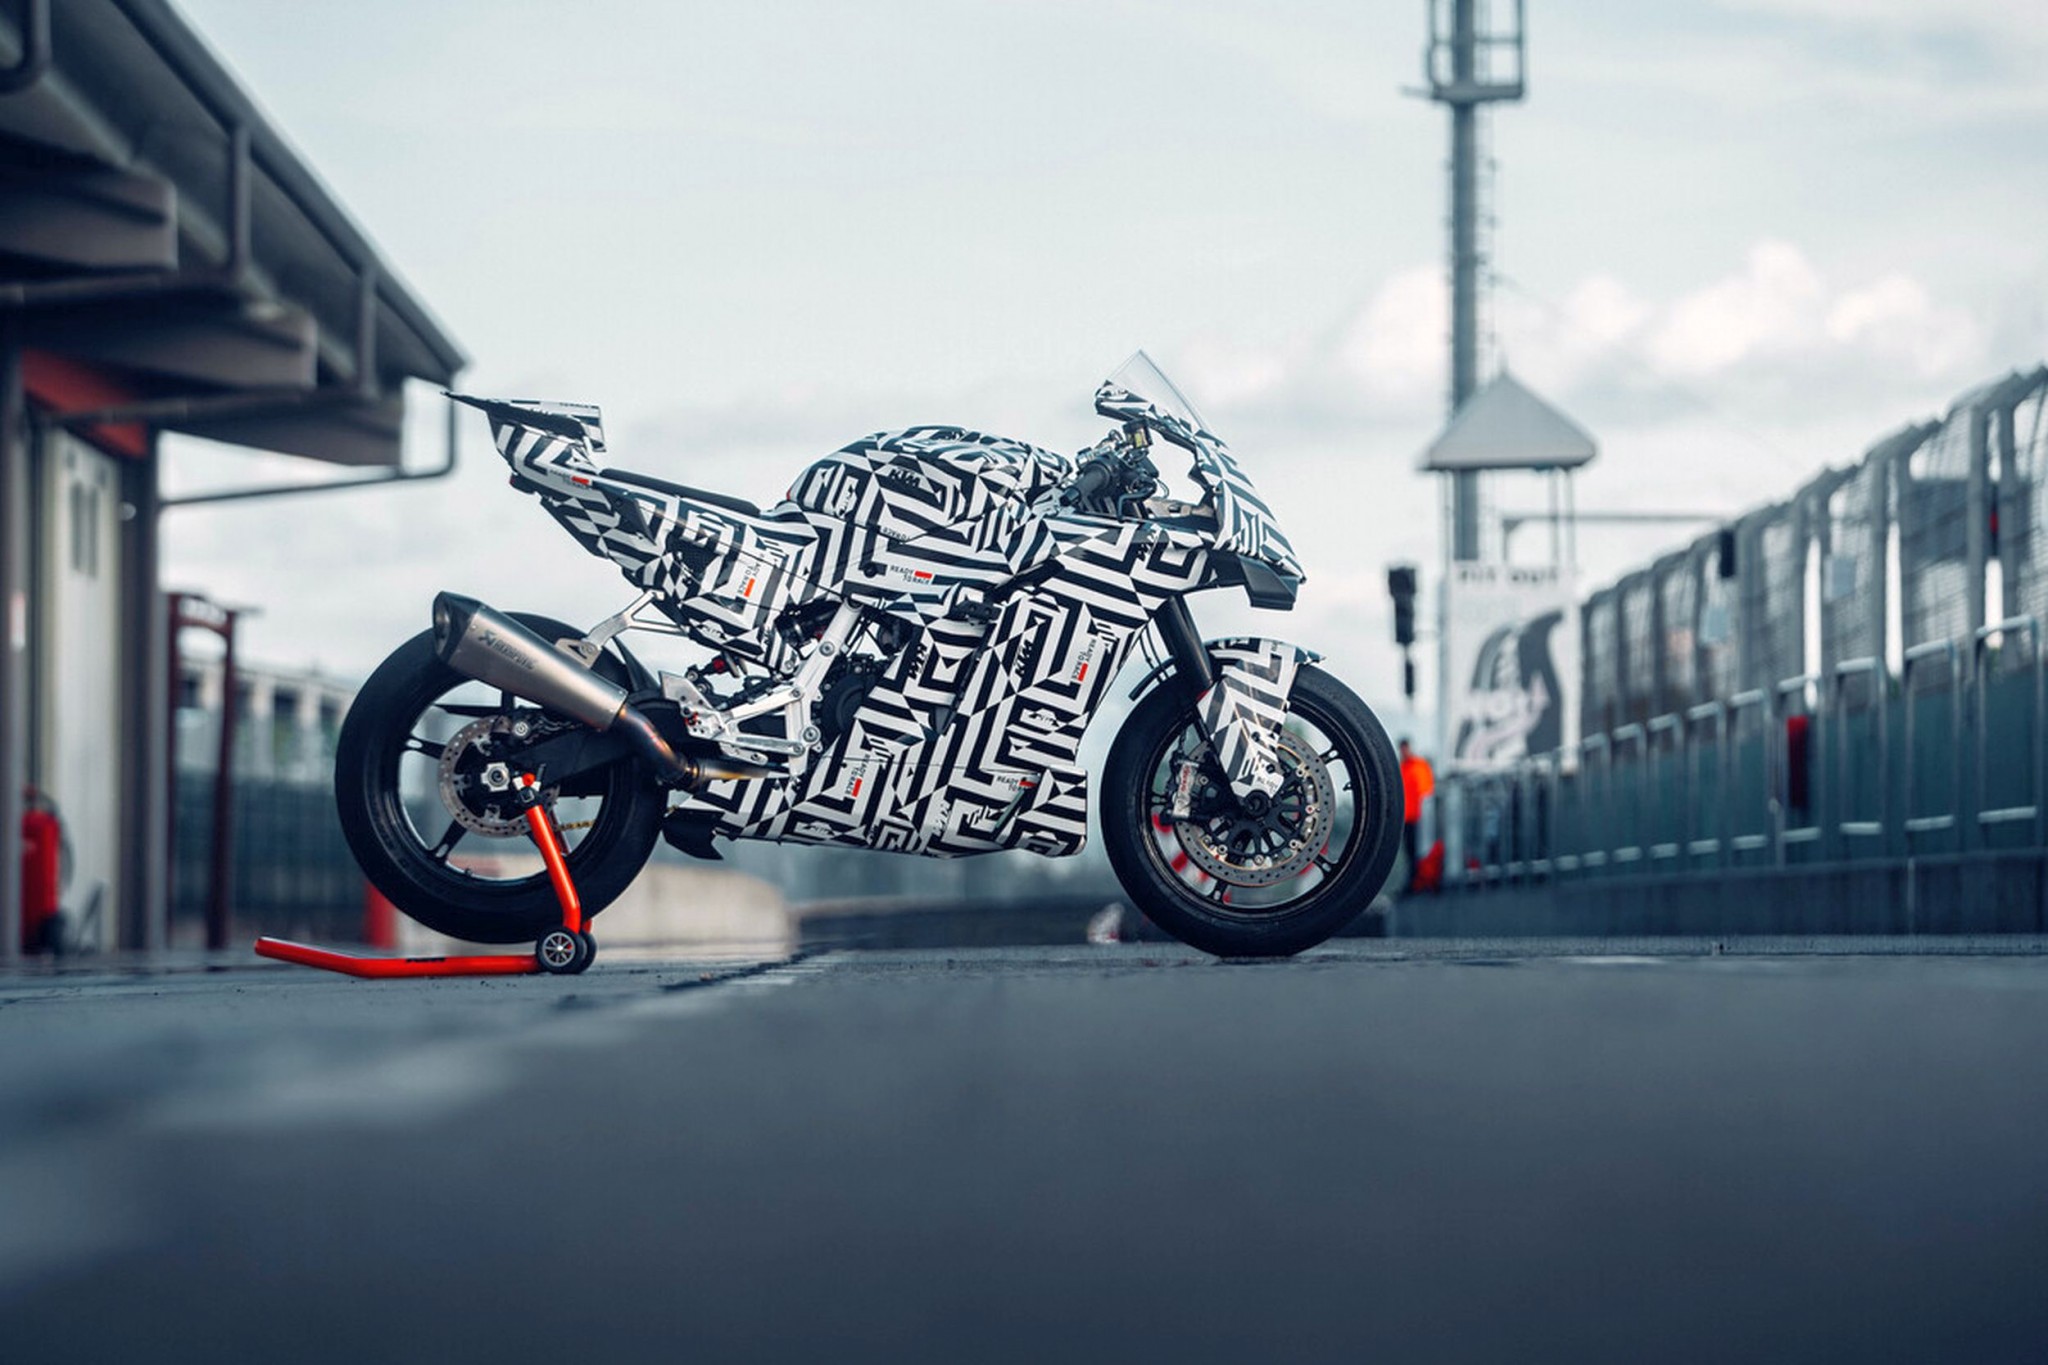 KTM 990 RC R - finally the thoroughbred sports bike for the road! - Image 1